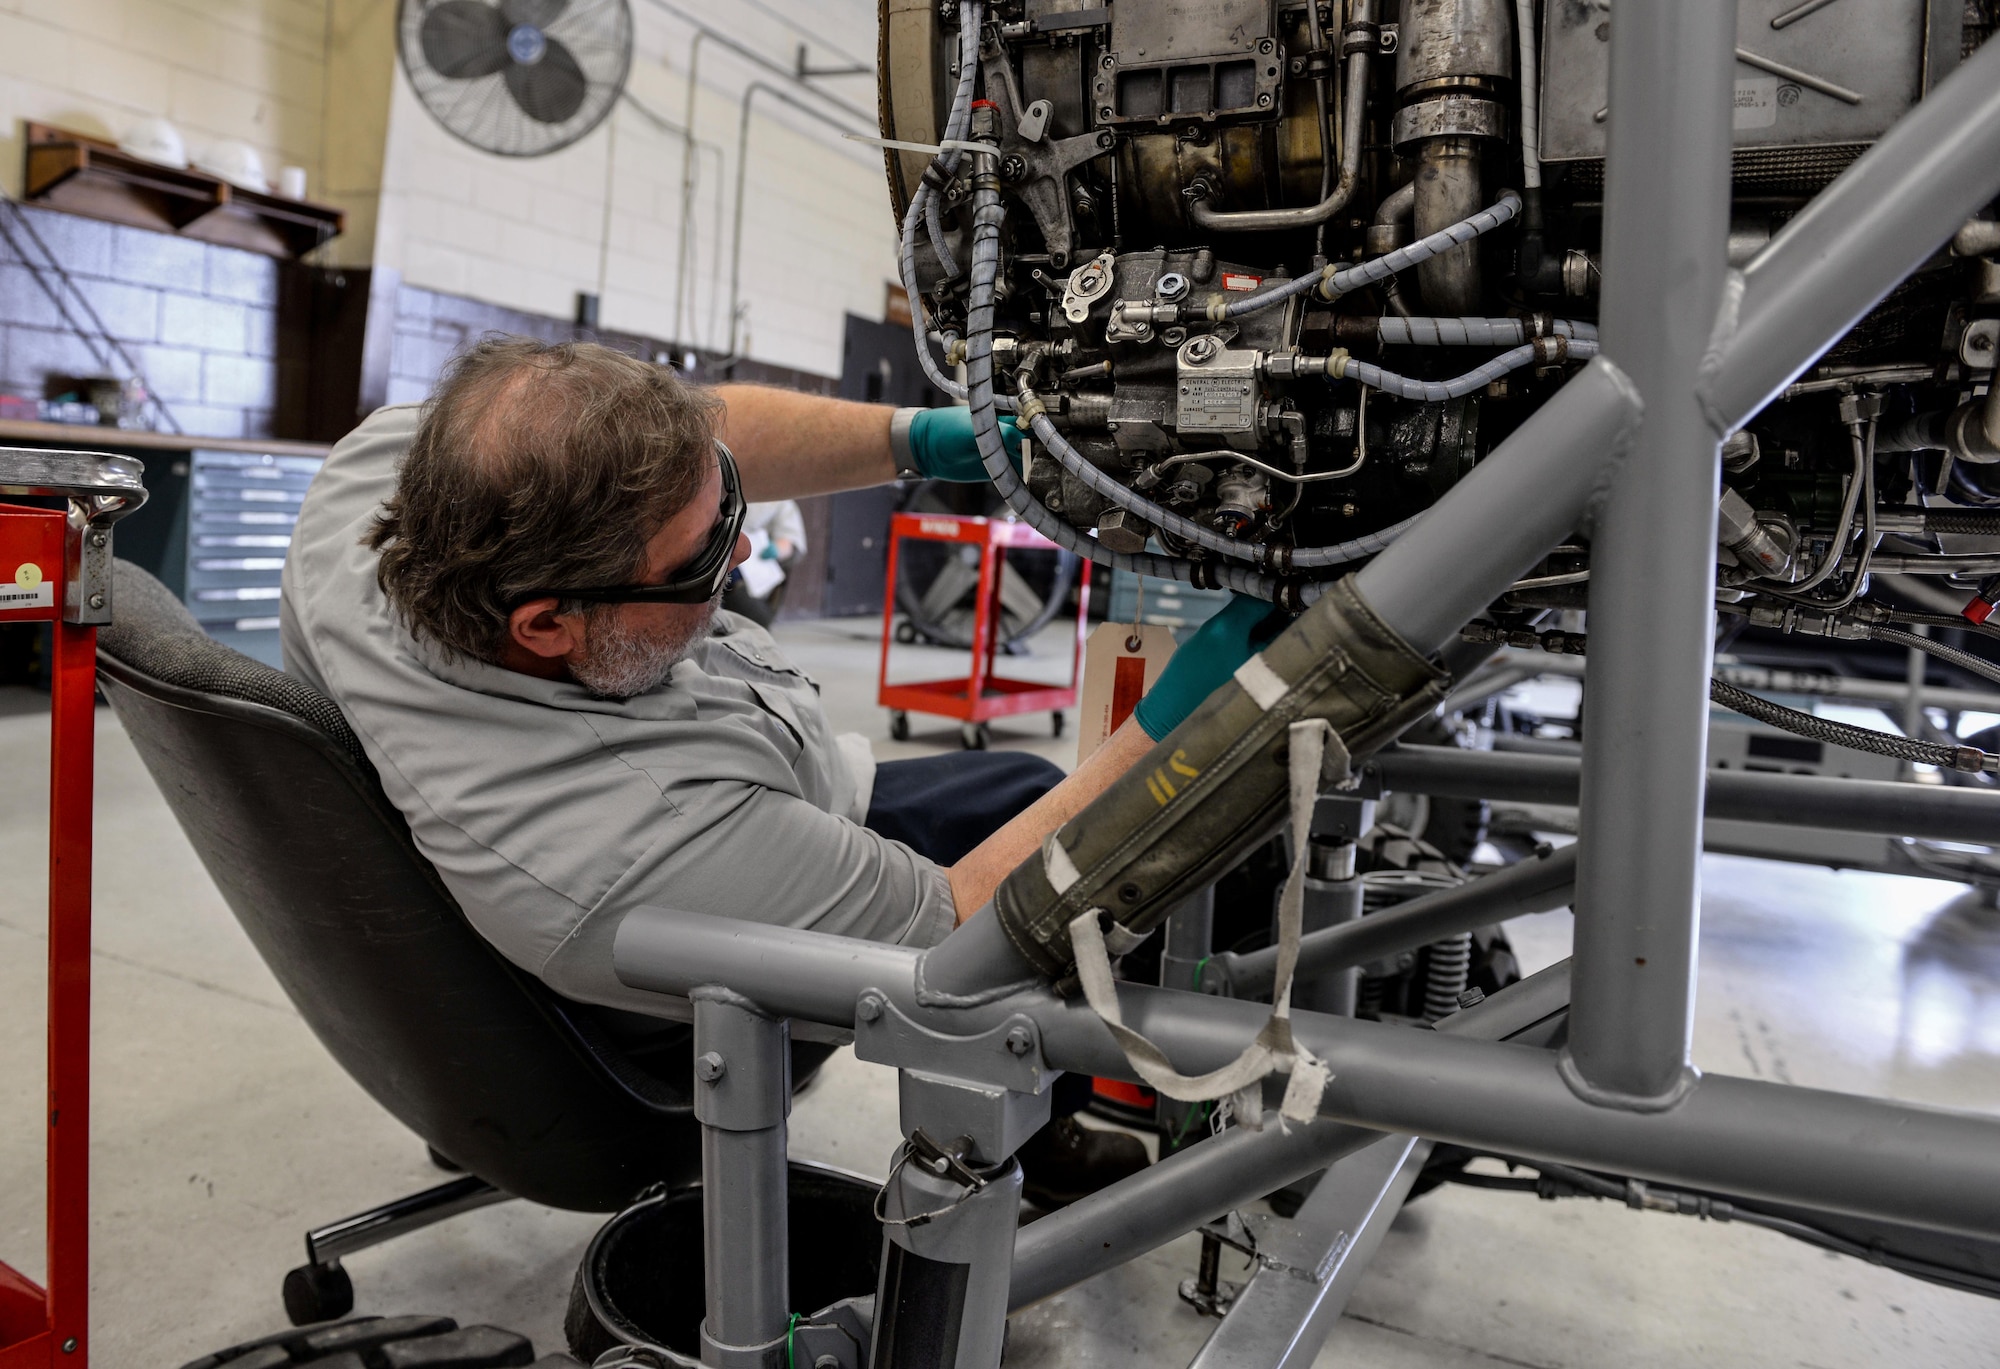 Frank Hall, M1 Support Services propulsion mechanic, performs maintenance on a General Electric J85-GE-5 turbojet engine April 17, 2020, at Columbus Air Force Base, Miss. Propulsion means to push or drive an object forward, and these engines help power the wing’s T-38 Talons. (U.S. Air Force photo by Airman 1st Class Davis Donaldson)